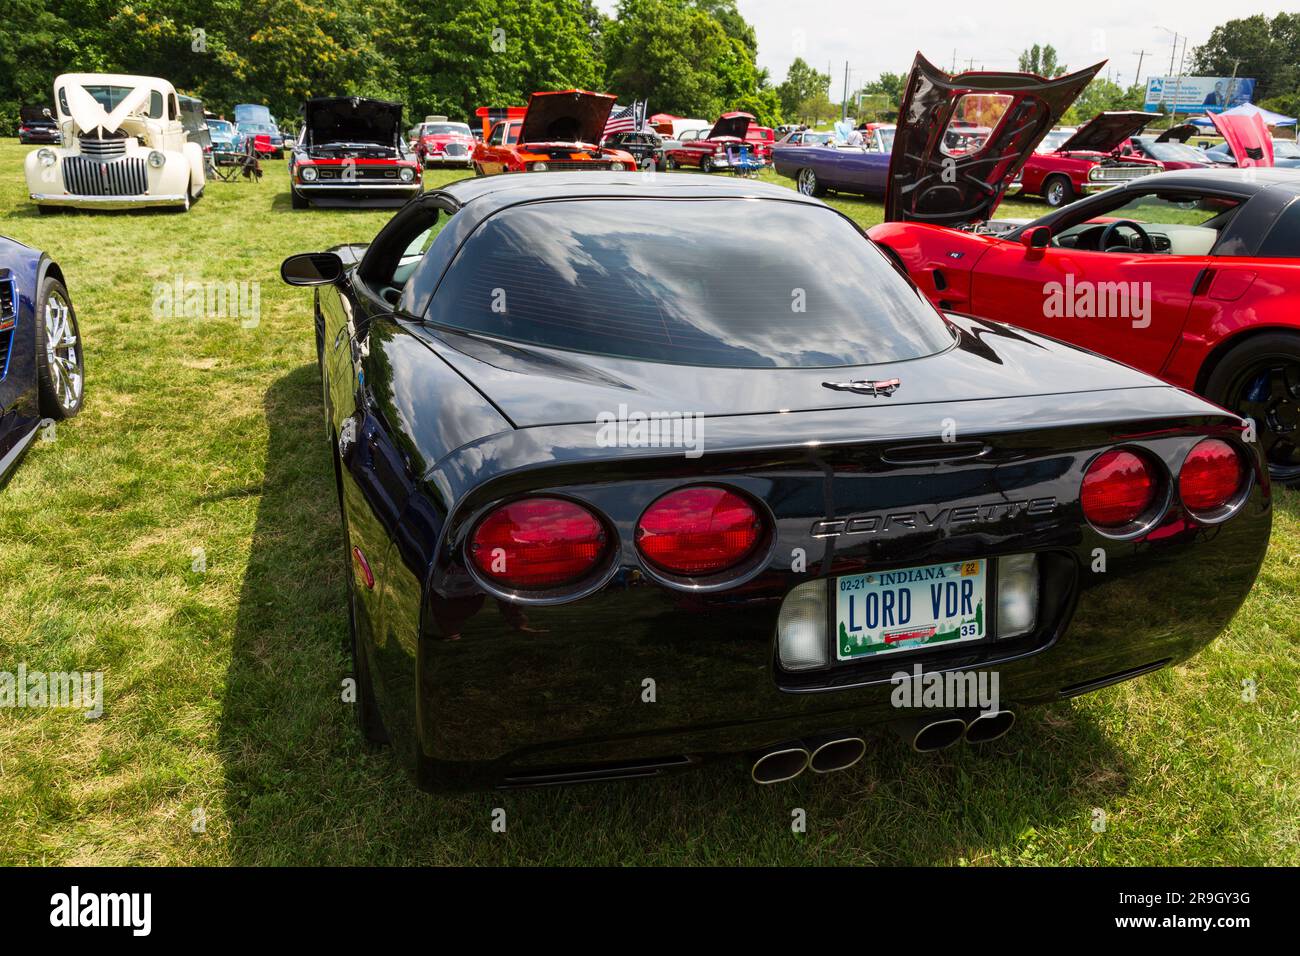 A black C5 Chevrolet Corvette with personalized license plate 'LORD VDR' is on display at a car show in Fort Wayne, Indiana, USA. Stock Photo